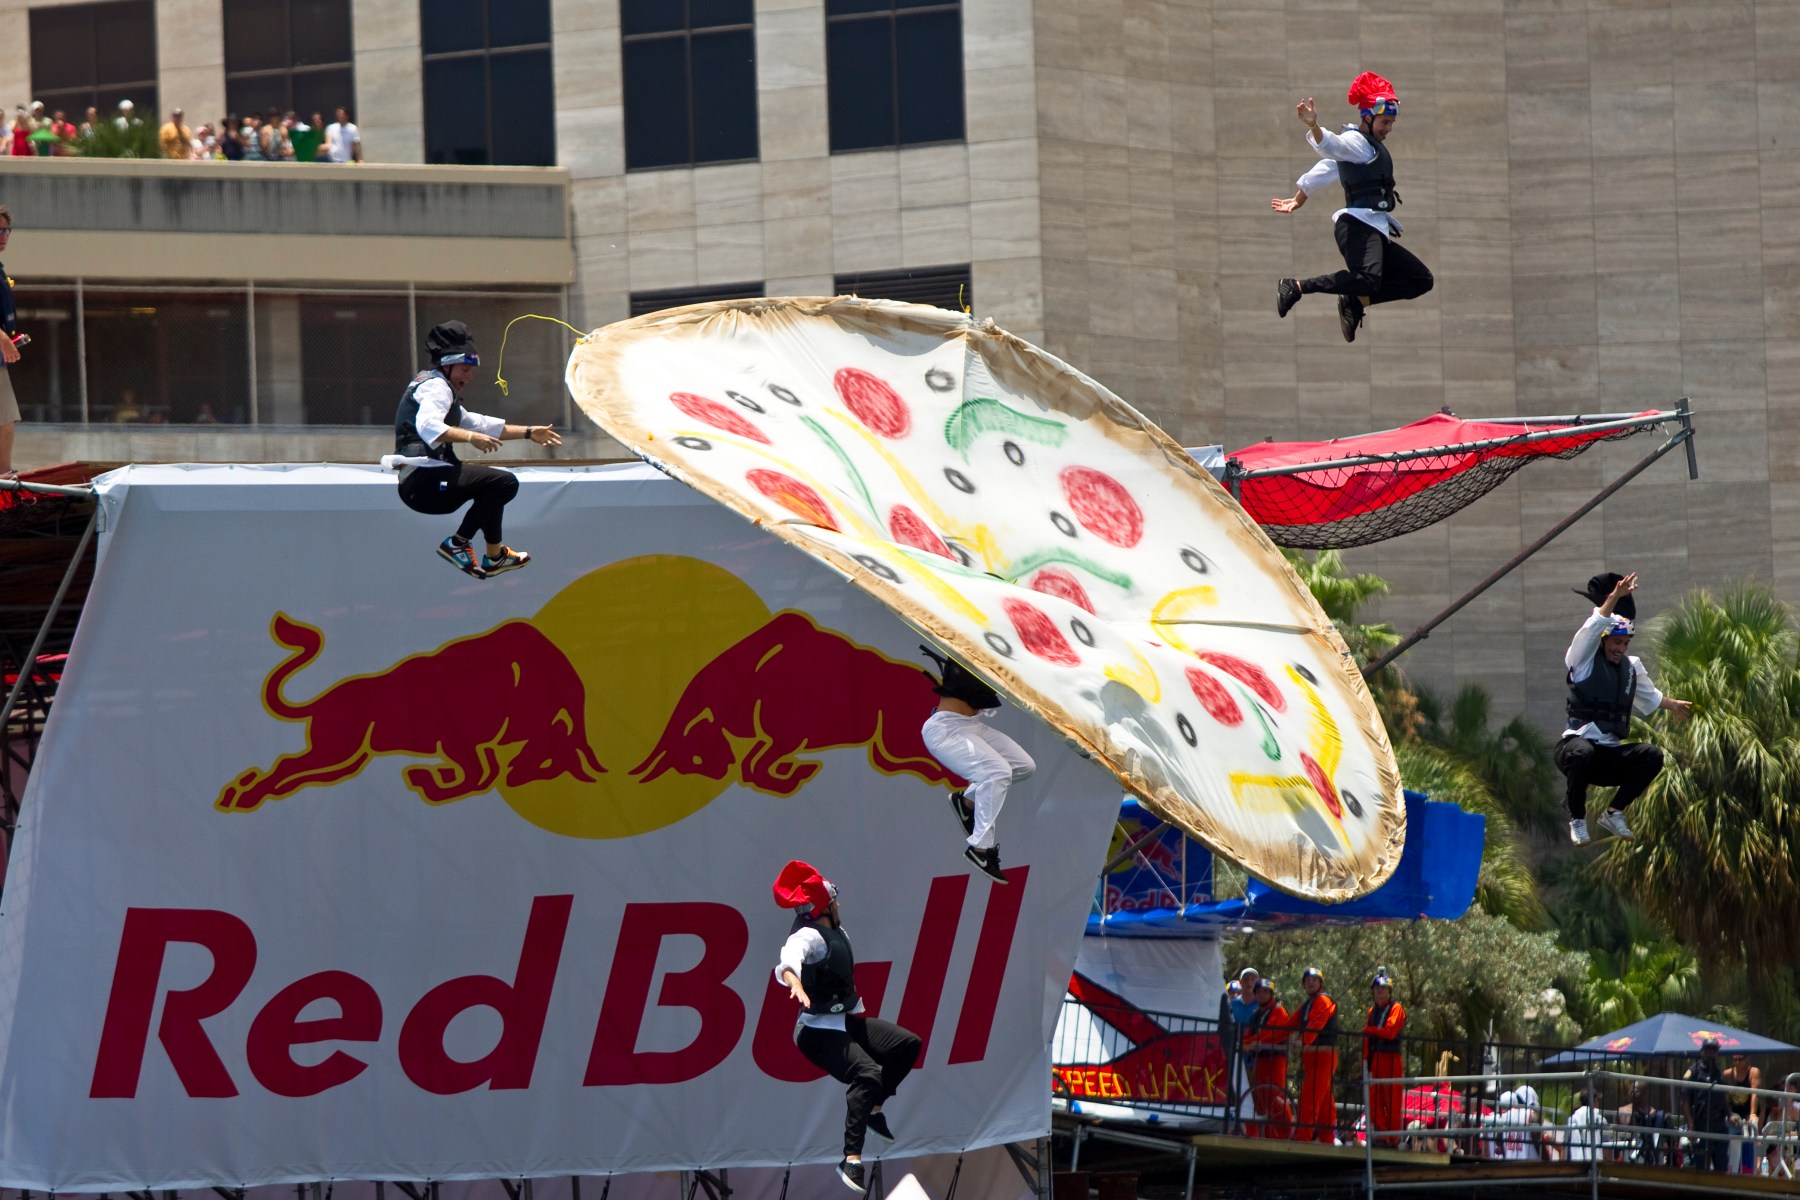 This flying pizza airplane, Toss Pizza, from Team Save Salad made it just off the ramp’s edge in 2010 in Miami.